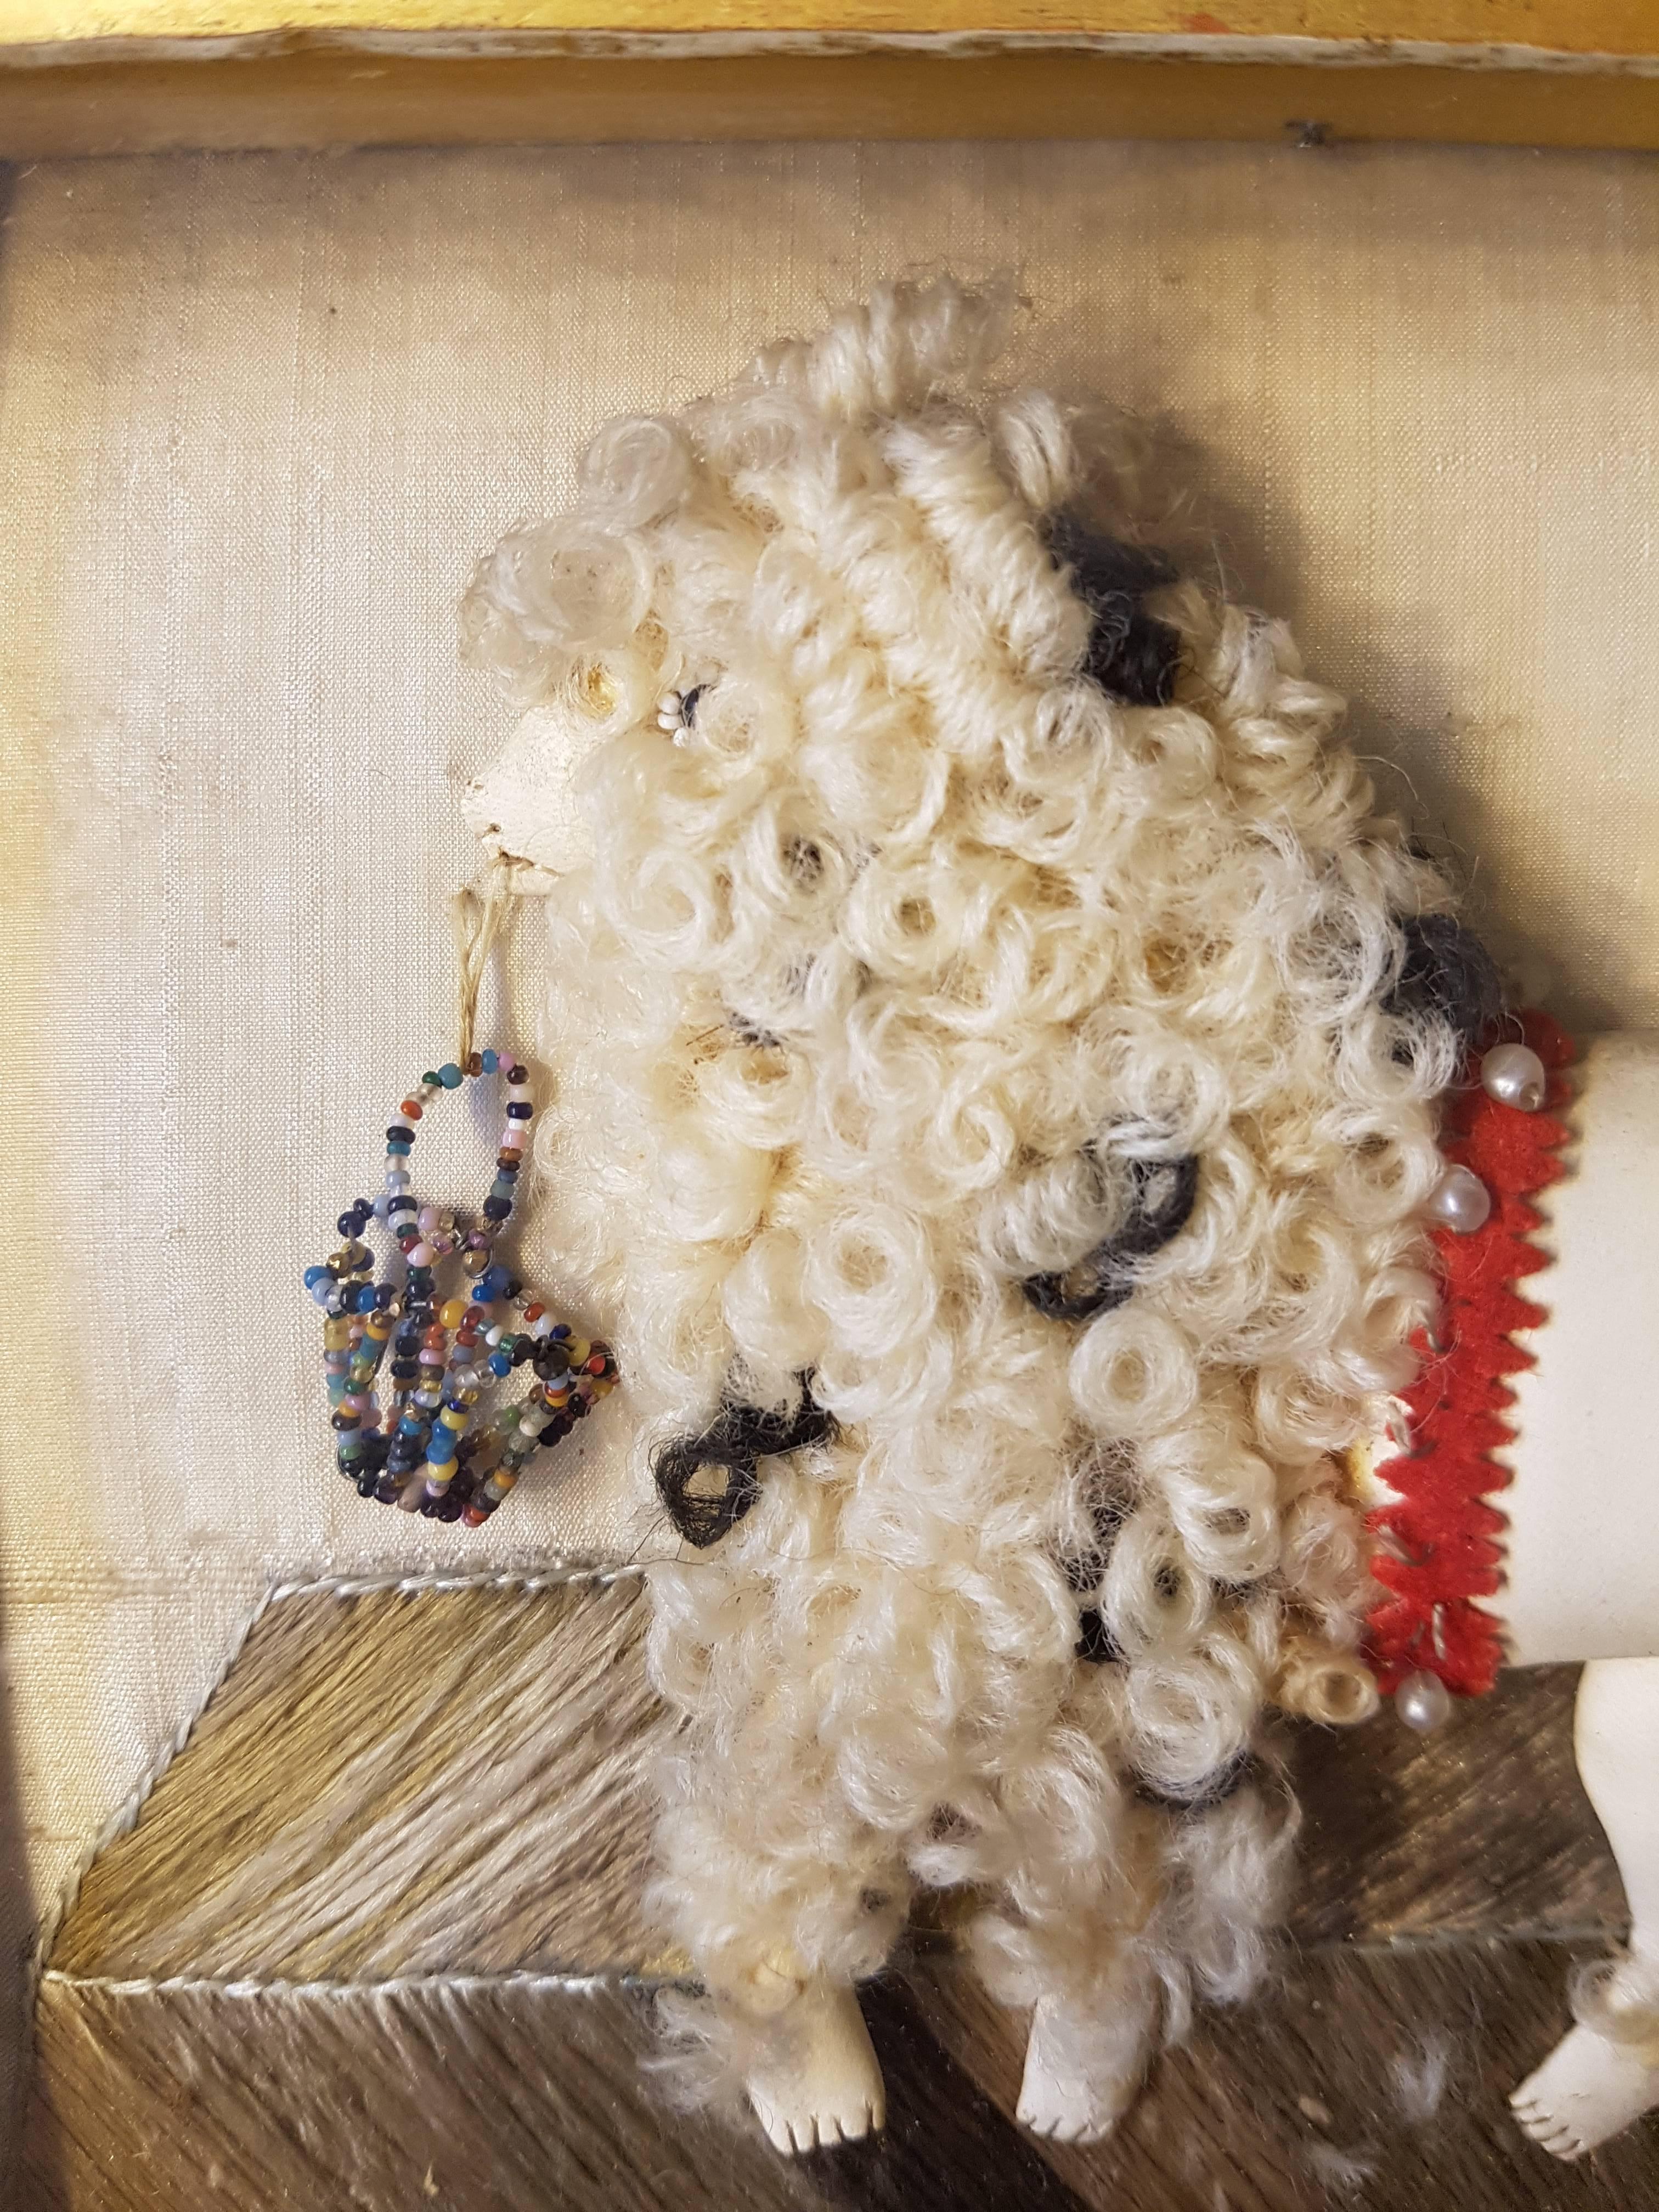 Late 19th century French framed curiosity: poodle made of leather, wool and pearls sewn on silk.